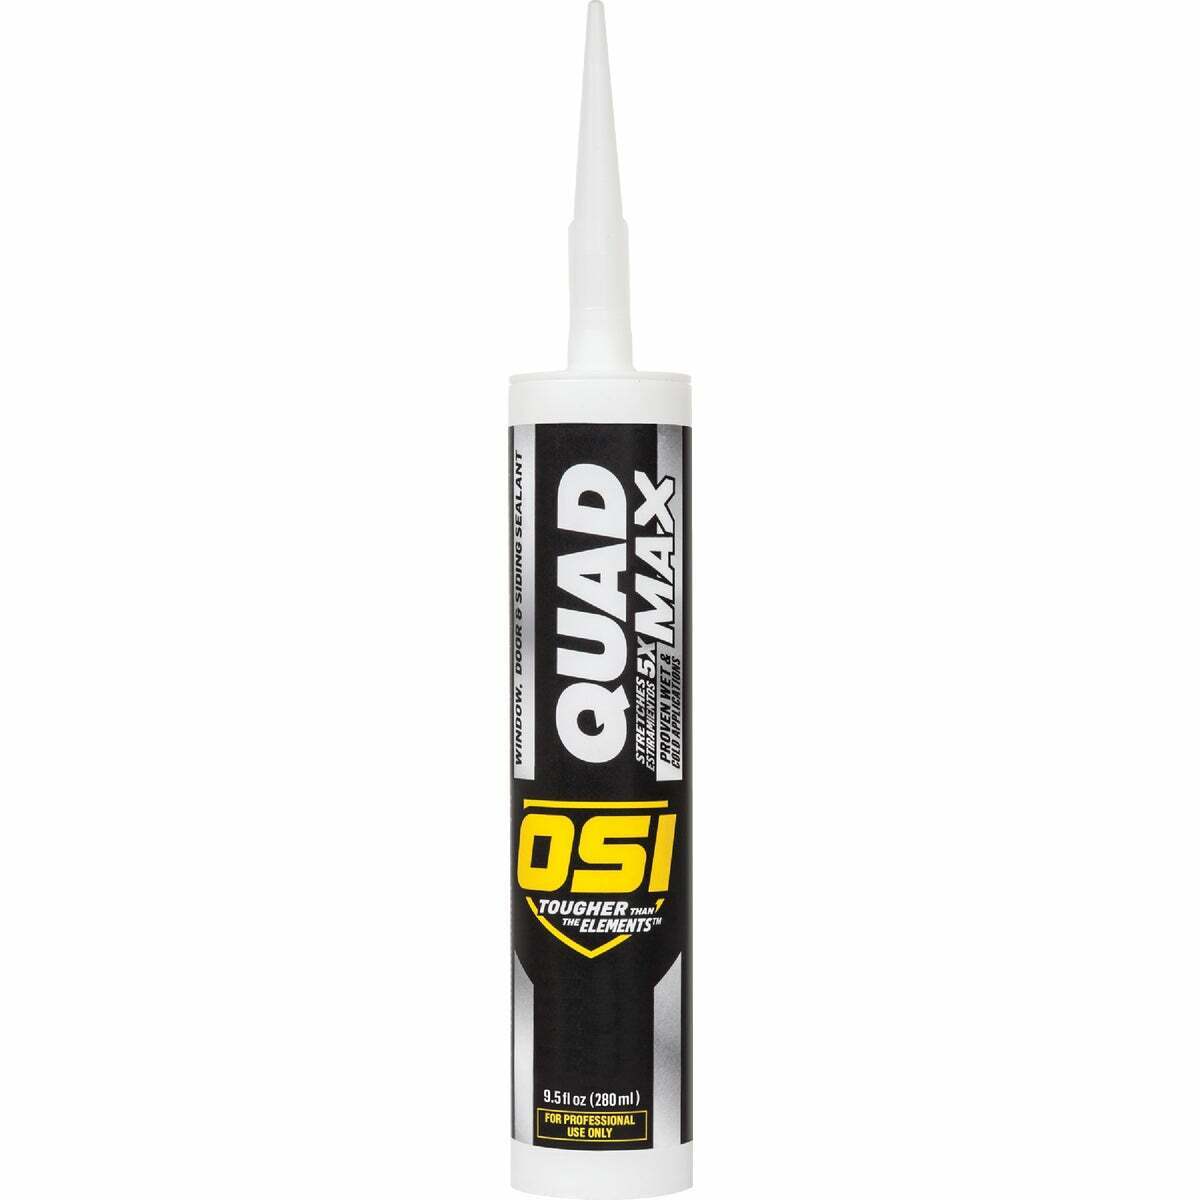 OSI QUAD MAX 9.5 Oz. Cheap mail order specialty store 1869413 2021 model Beige Sealant